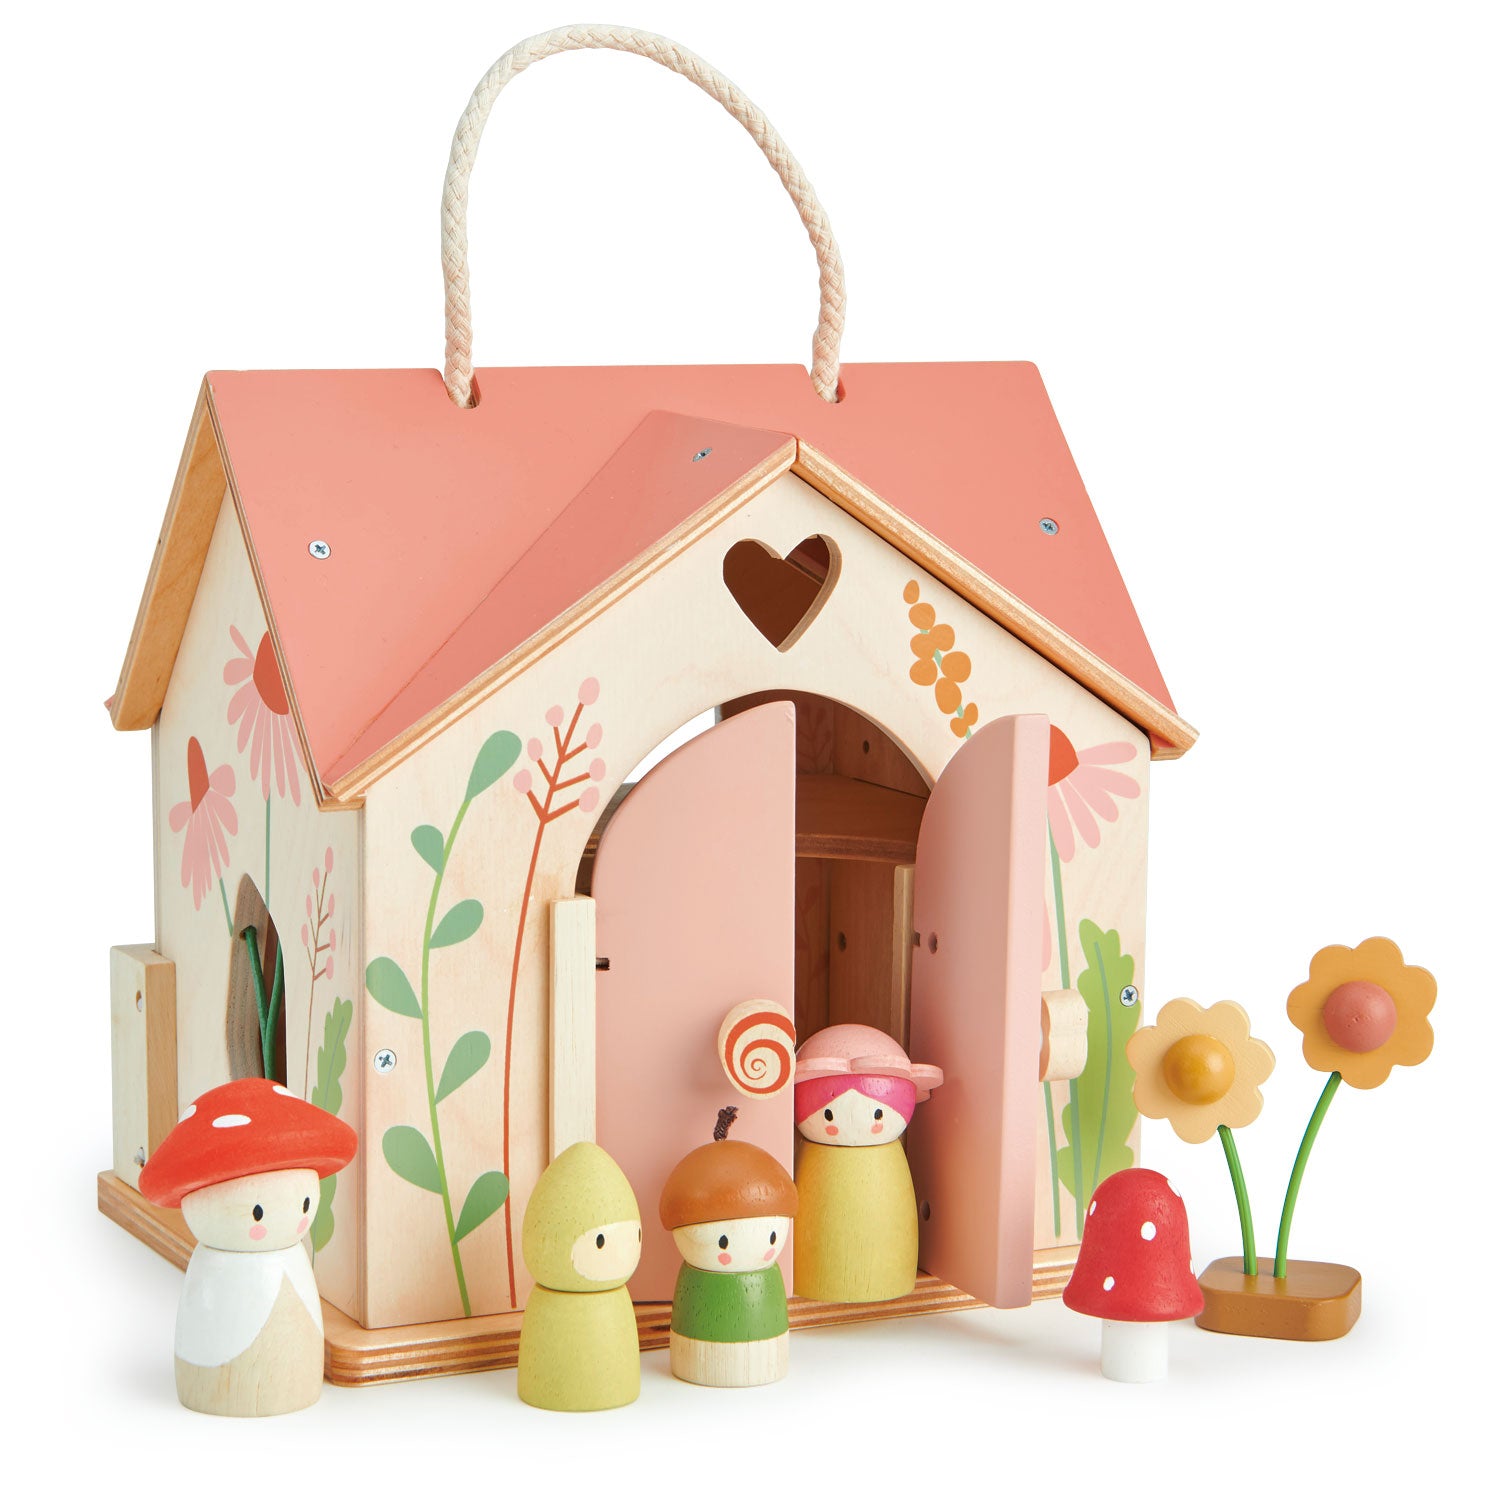 <p>The cutest woodland cottage you ever did see. With a rose colored gabled roof, opening front doors and a removable back panel, this little house can be carried to be played with anywhere. Decorated on all sides with beautiful wild flowers, and two cut out windows which allow the flower stems to run through creating a magical meadow look. The back panel lies flat to become a garden, on to which can be placed a pretty swing, 2 flowers, and a toadstool. We have included a wood burning stove, flower table, 2 button stools, a toadstool lamp and a side table. Tuck Bud up in his leafy fabric bed, or push Corny on the swing while mummy Flora and Daddy Joey watch the stars go by.</p>
<p>Age range: 3 Years And Older  </p>
<p>·Product size: 16.54 x 15.75 x 12.2”  </p>
<p> Weight: 3.34 lbs</p>
<p><a href="https://www.dropbox.com/s/6vlzkymh820w8fc/TL8381%20Rosewood%20Basket%20Printable.pdf?dl=0"><strong>Download Rosewood Basket Printable</strong></a></p>
<p><strong>Related Products</strong><a href="https://kids.allwomenstalk.com/products/sailaway-boat">Sailaway Boat</a><a href="https://kids.allwomenstalk.com/products/bunny-tales">Bunny Tales</a><a href="https://kids.allwomenstalk.com/products/bear-tales">Bear Tales</a></p>
